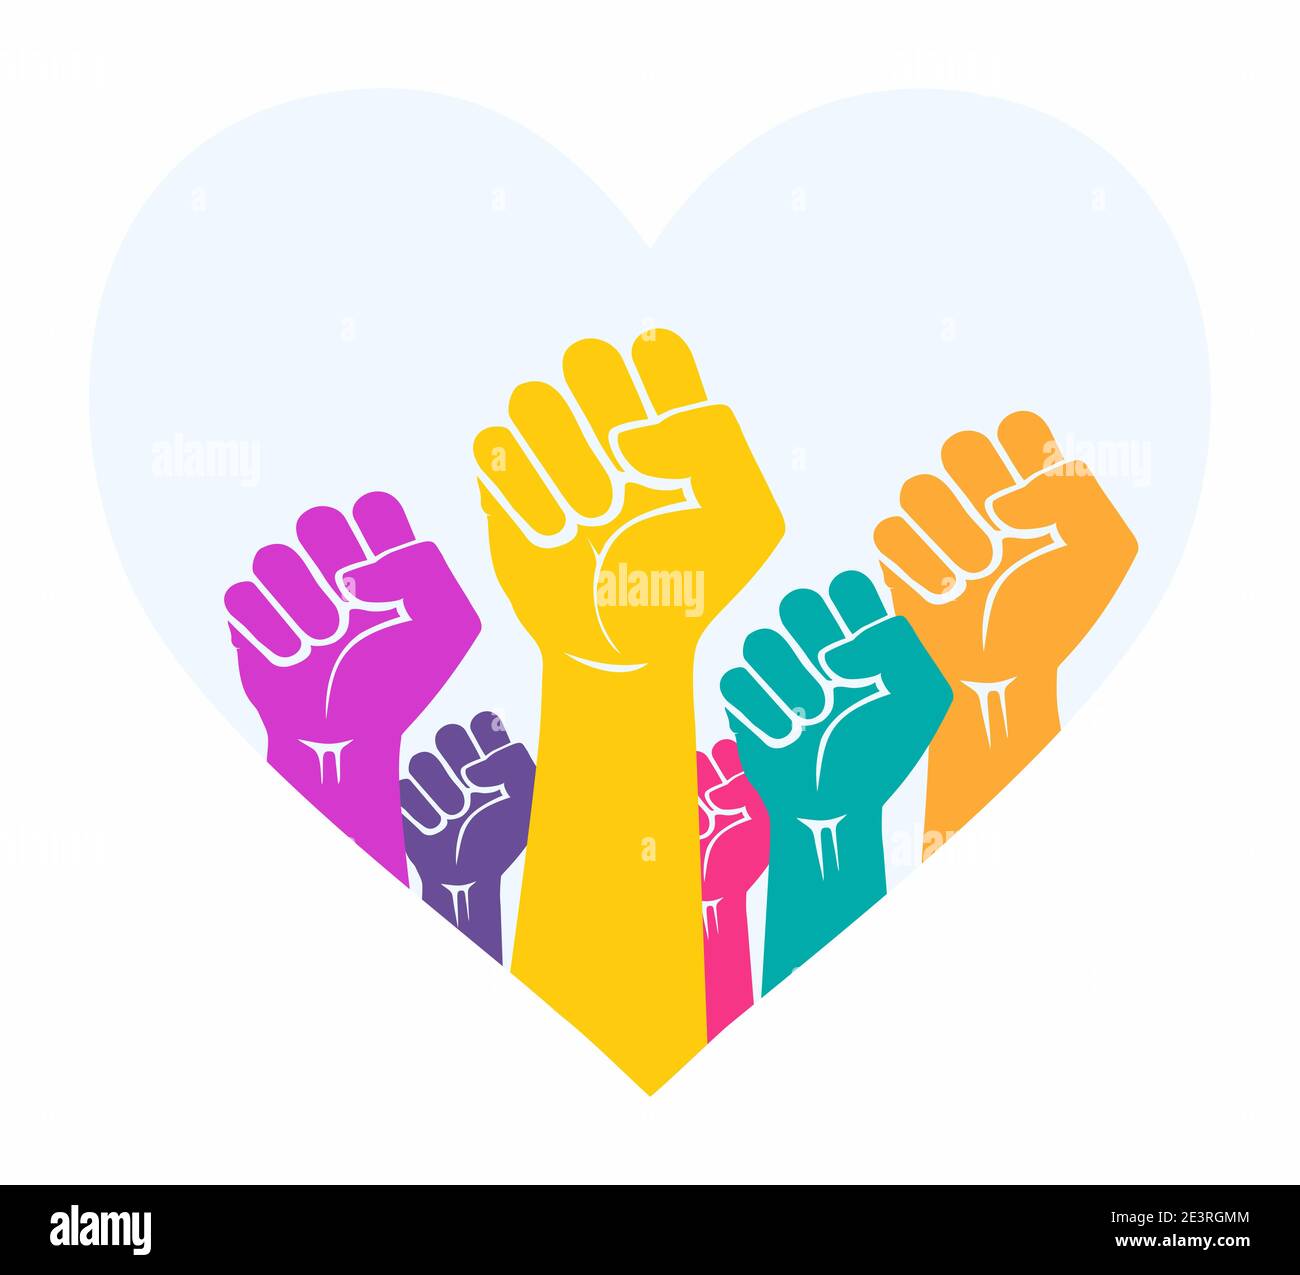 Racially-diverse people's hands with fists raised in the air inside a heart shape. Symbol of love and unity. Diversity, community and solidarity icon. Stock Vector